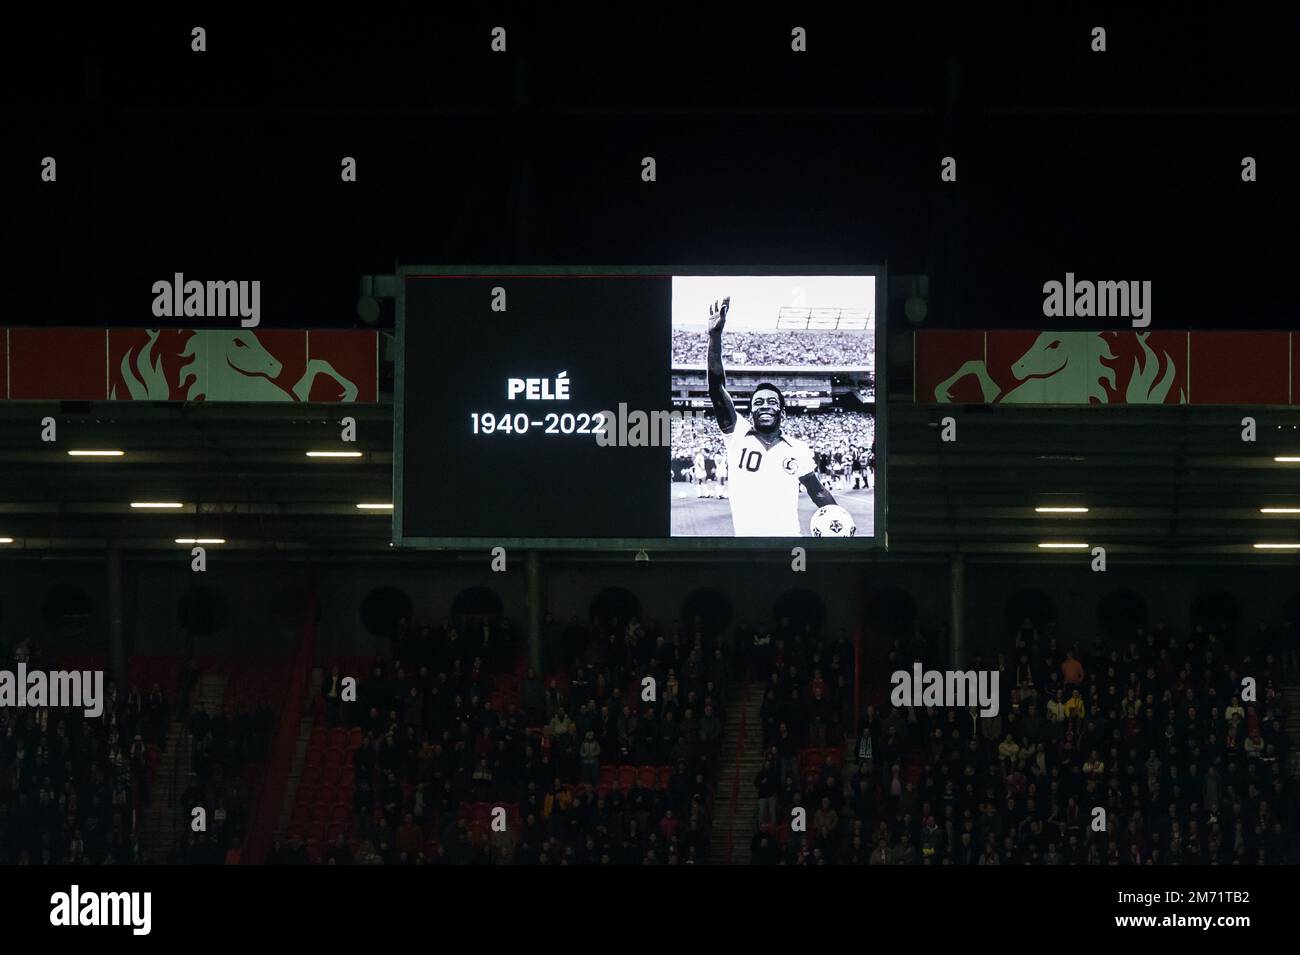 ENSCHEDE - Minute of silence in memory of Pele prior to the Dutch premier  league match between FC Twente and FC Emmen at Stadion De Grolsch Veste on  January 6, 2023 in